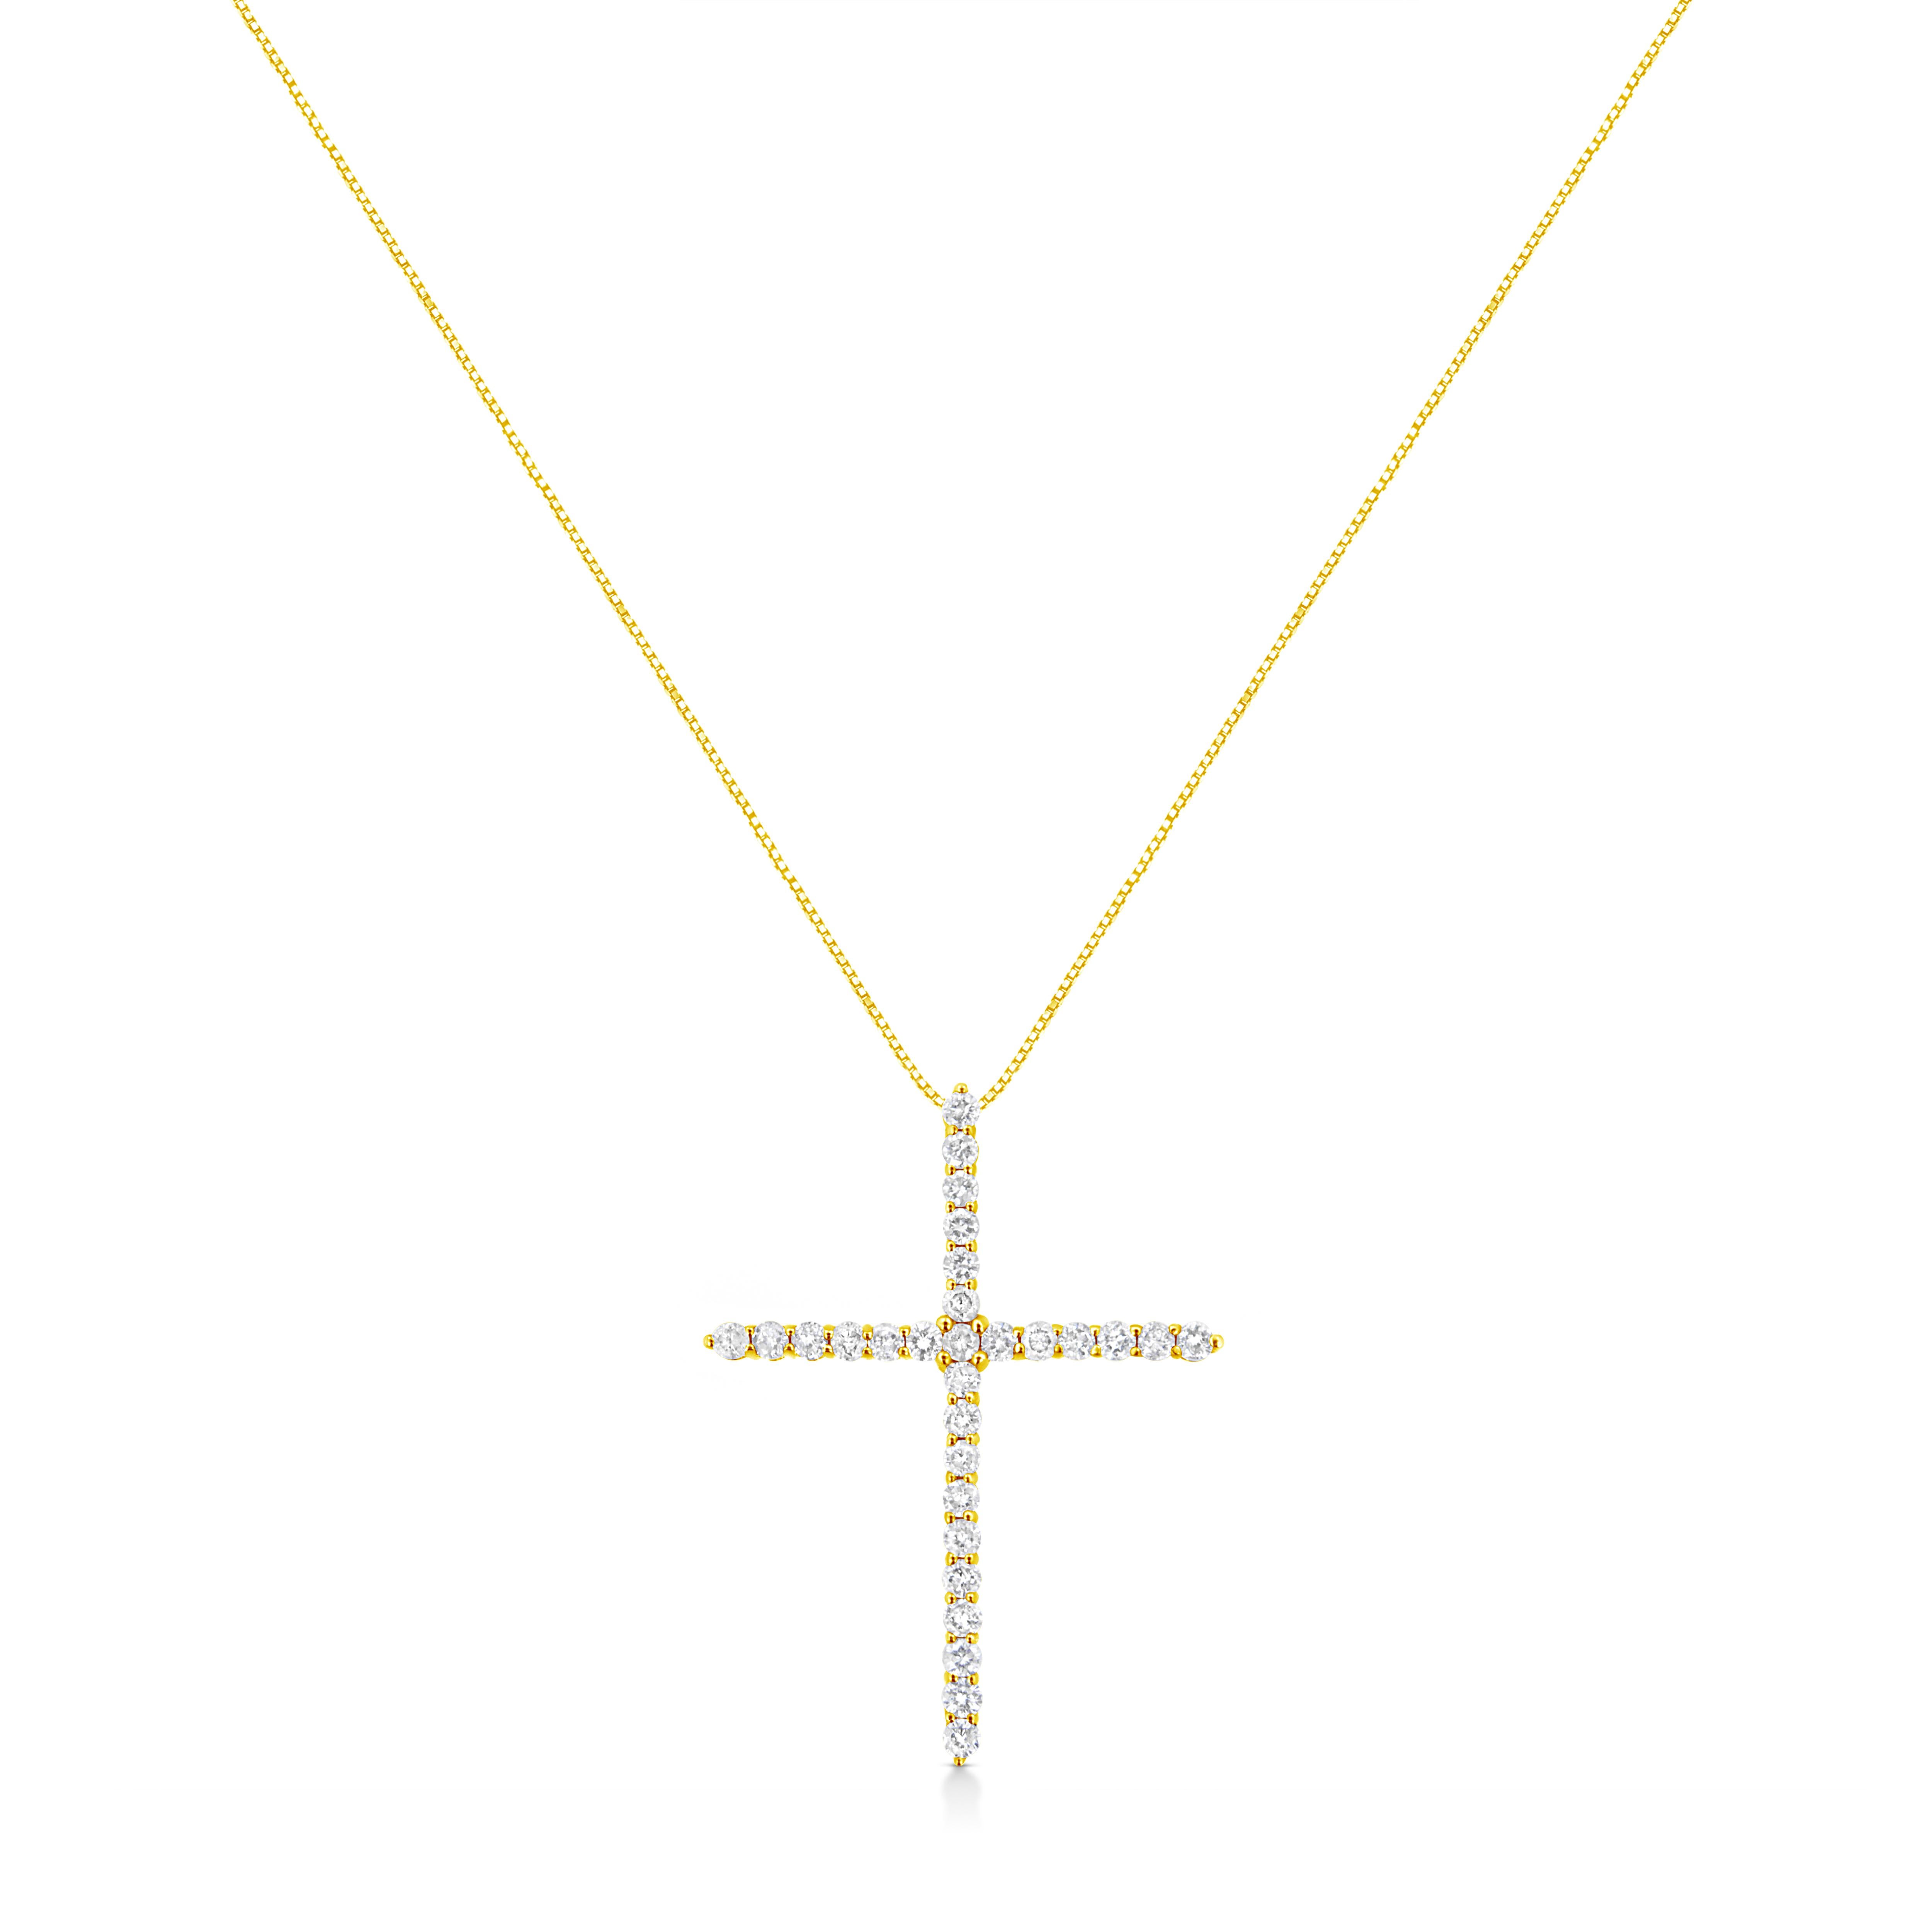 This glamorous cross pendant is embellished with a stunning total carat weight of 3 cttw. Beautiful and natural round-cut diamonds glimmer in this necklace and are set in the finest 10k yellow gold that will shine on your necklace. This piece will